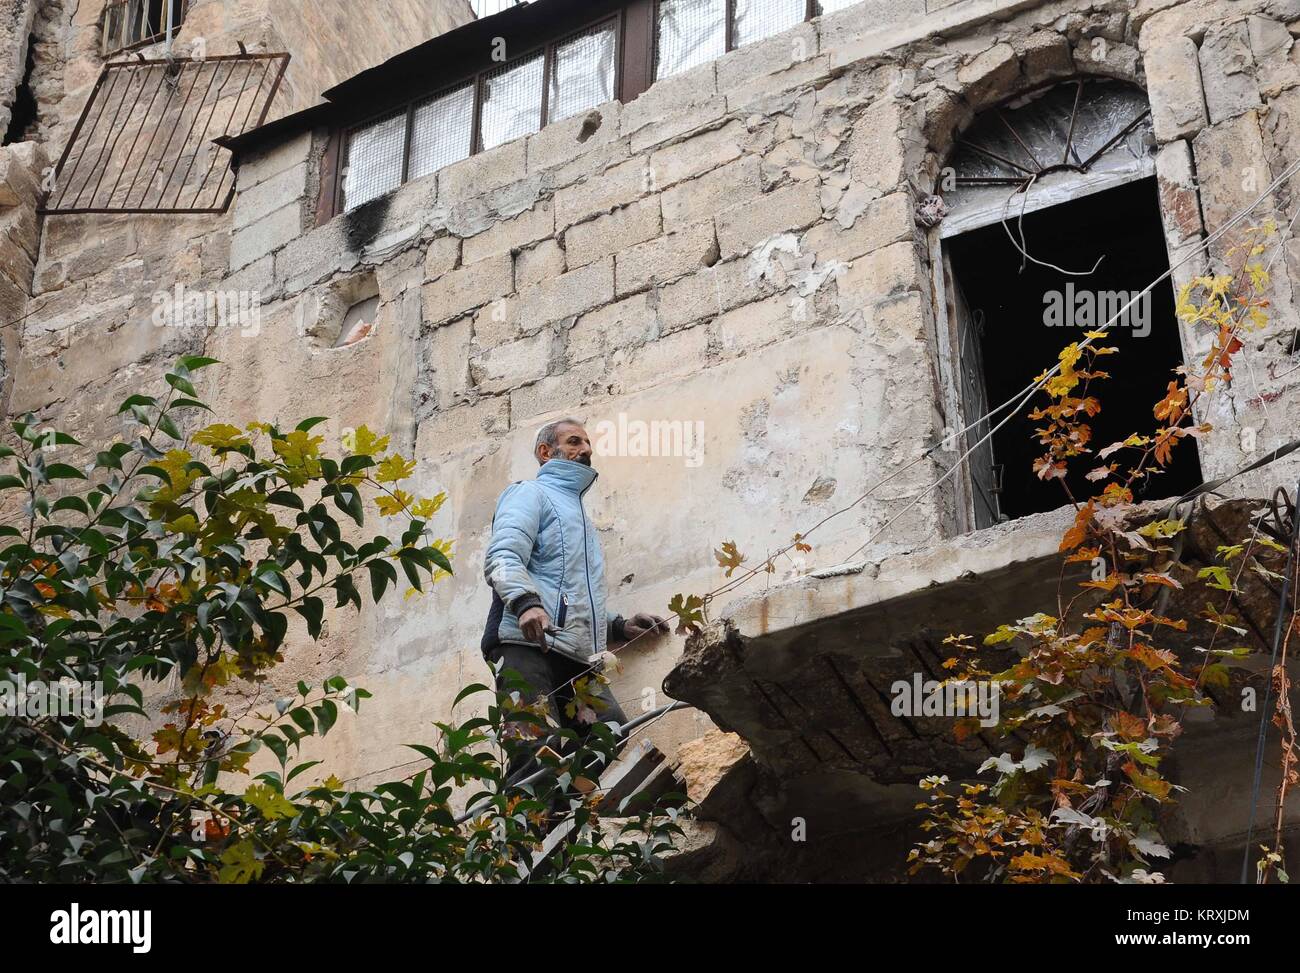 Aleppo, Syria. 21st Dec, 2017. Maher Khayata, a 60-year-old man, climbs a precarious ladder over the destroyed staircase to his home on the rooftop of a shattered shopping compound in the Old City of Aleppo, northern Syria, on Dec. 21, 2017. Khayata is the guardian of a shopping compound. He has spent his life protecting the compound and making sure it stays safe. When the war shattered his life and squashed all into ruins, he remained there, guarding each memory of his with every falling rock in the old city. Credit: Ammar Safarjalani/Xinhua/Alamy Live News Stock Photo